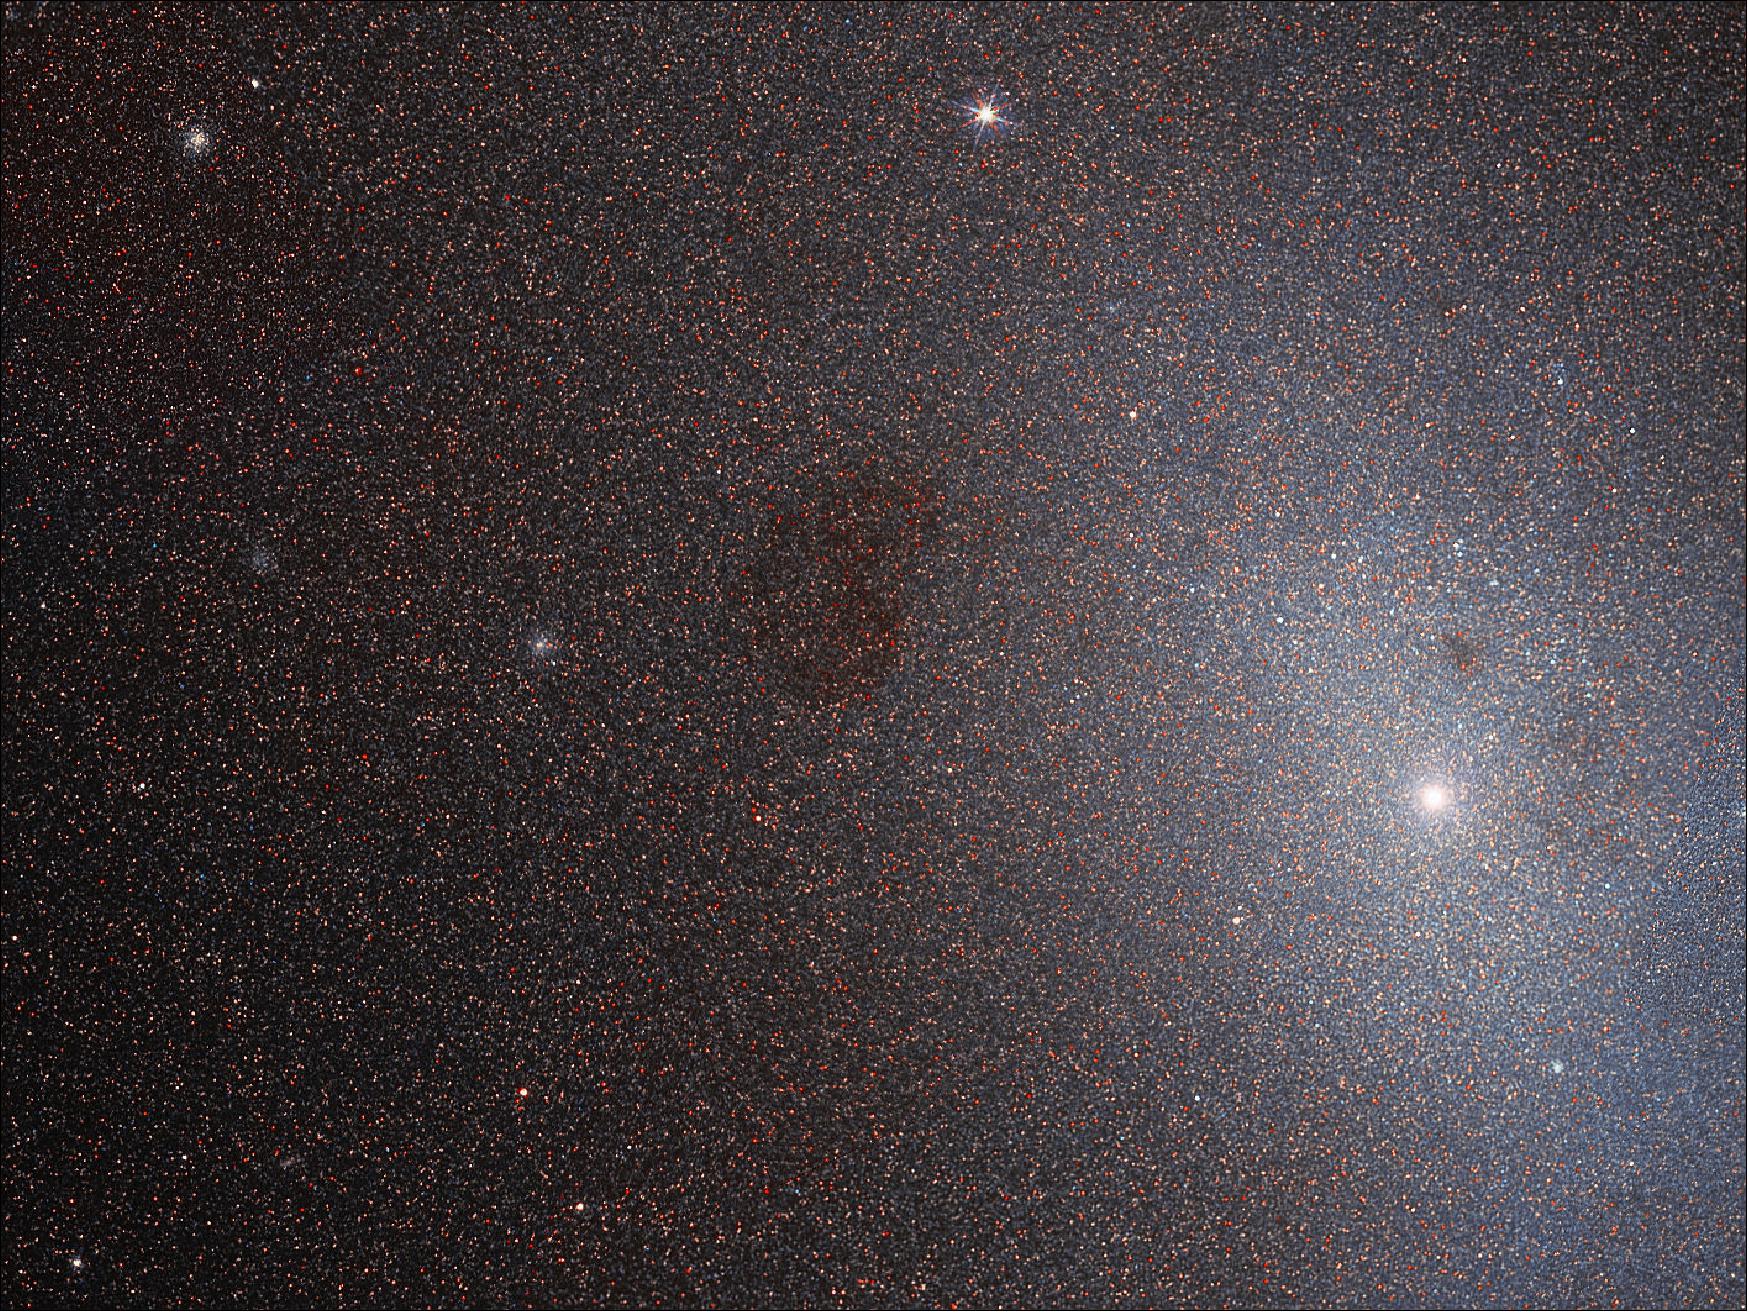 Figure 23: Not so dead after all, the Messier 110 dwarf elliptical galaxy observed with Hubble (image credit: ESA/Hubble & NASA, L. Ferrarese et al.; CC BY 4.0)